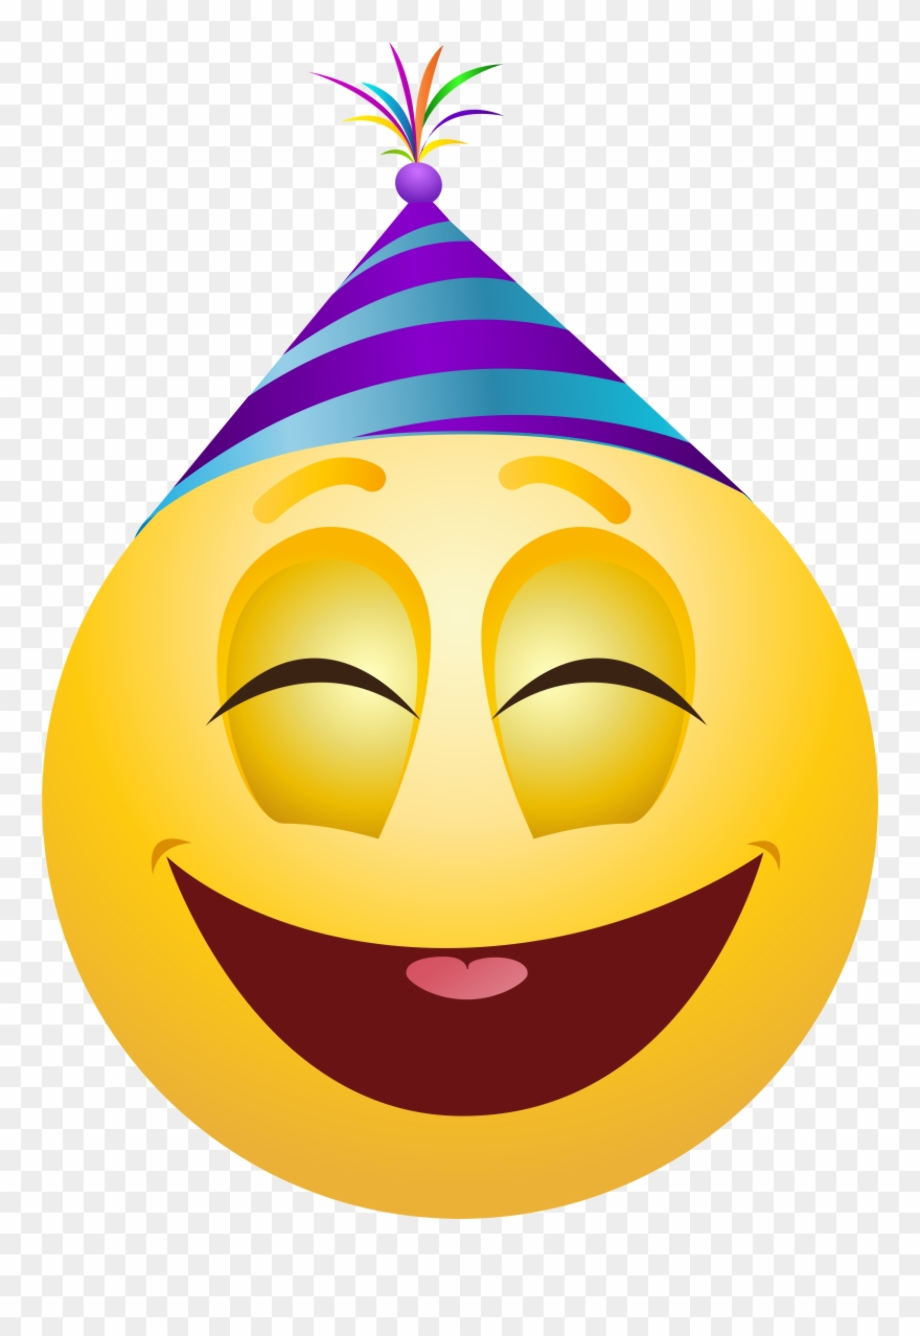 Download High Quality party hat clipart emoji Transparent PNG Images